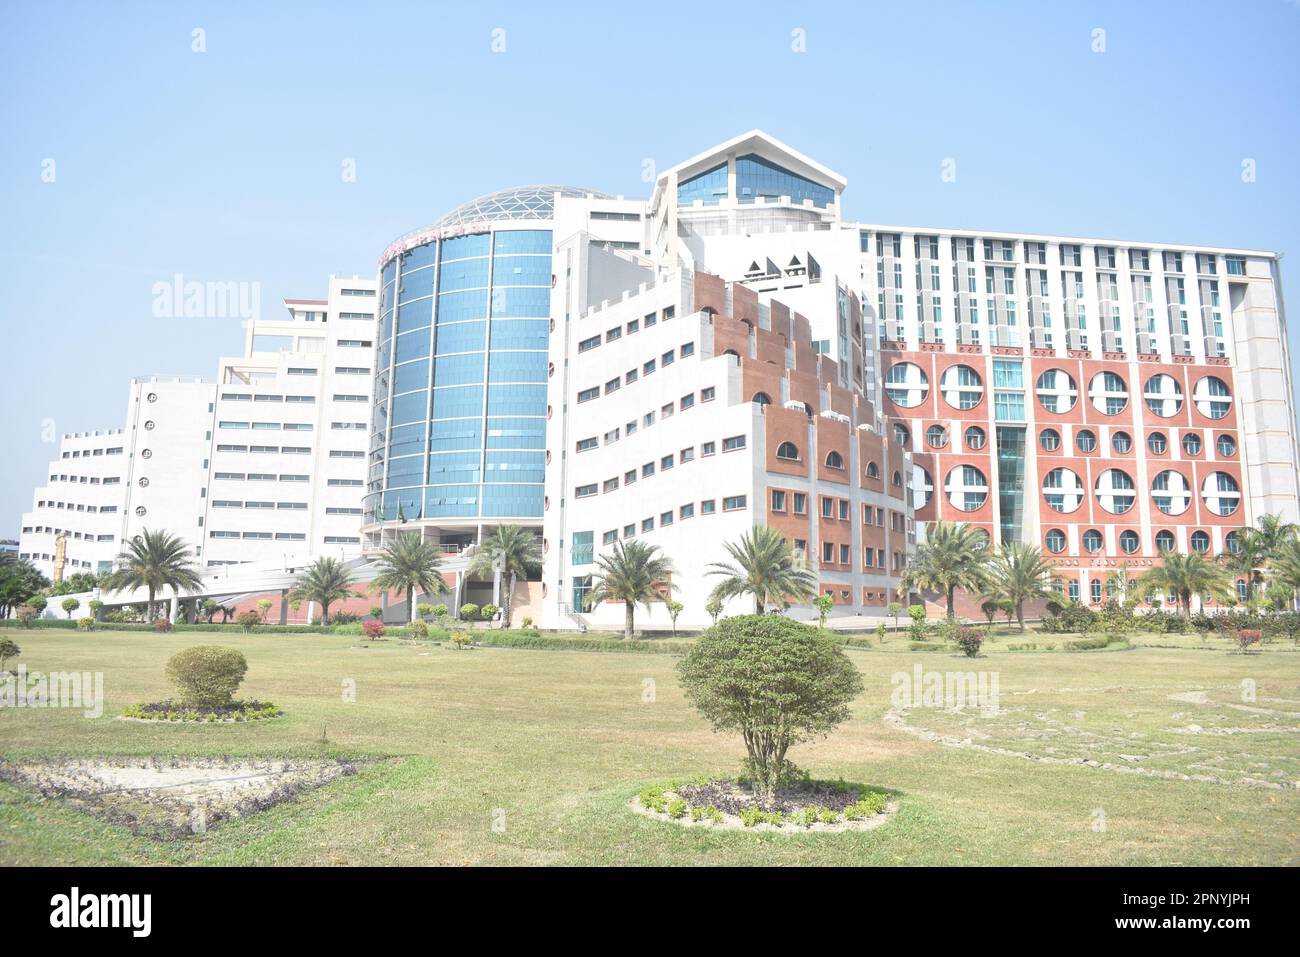 Bangladesh Military Academy (BMA) which is located at Bhatiary in the Chittagong district of Bangladesh. Army officers take their training from here. Stock Photo